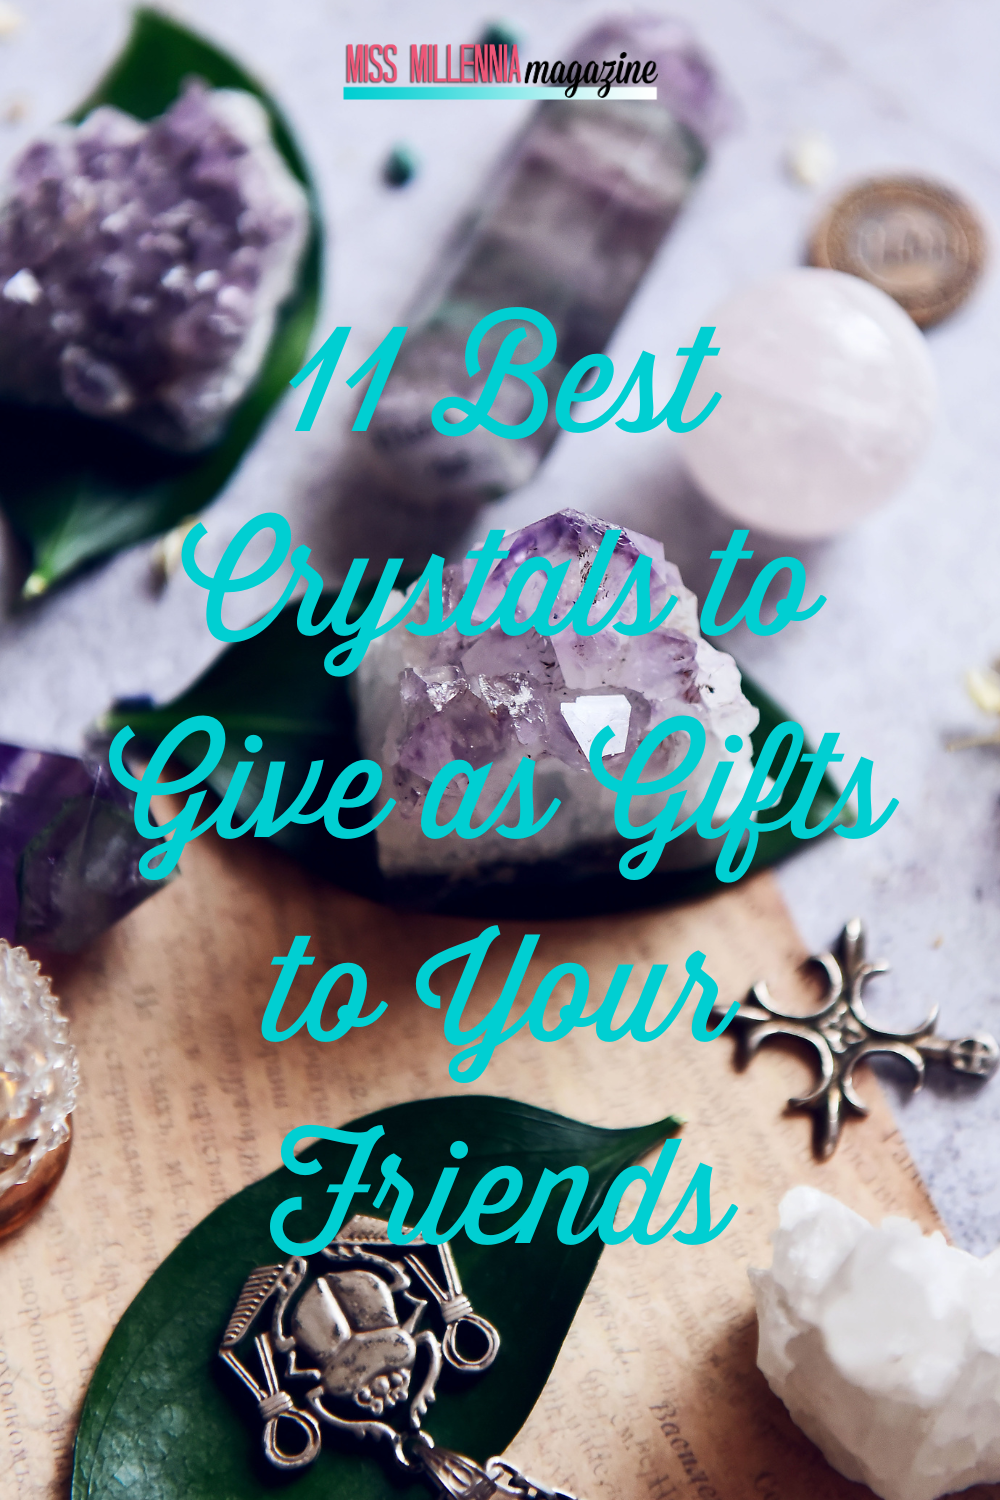 11 Best Crystals to Give as Gifts to Your Friends